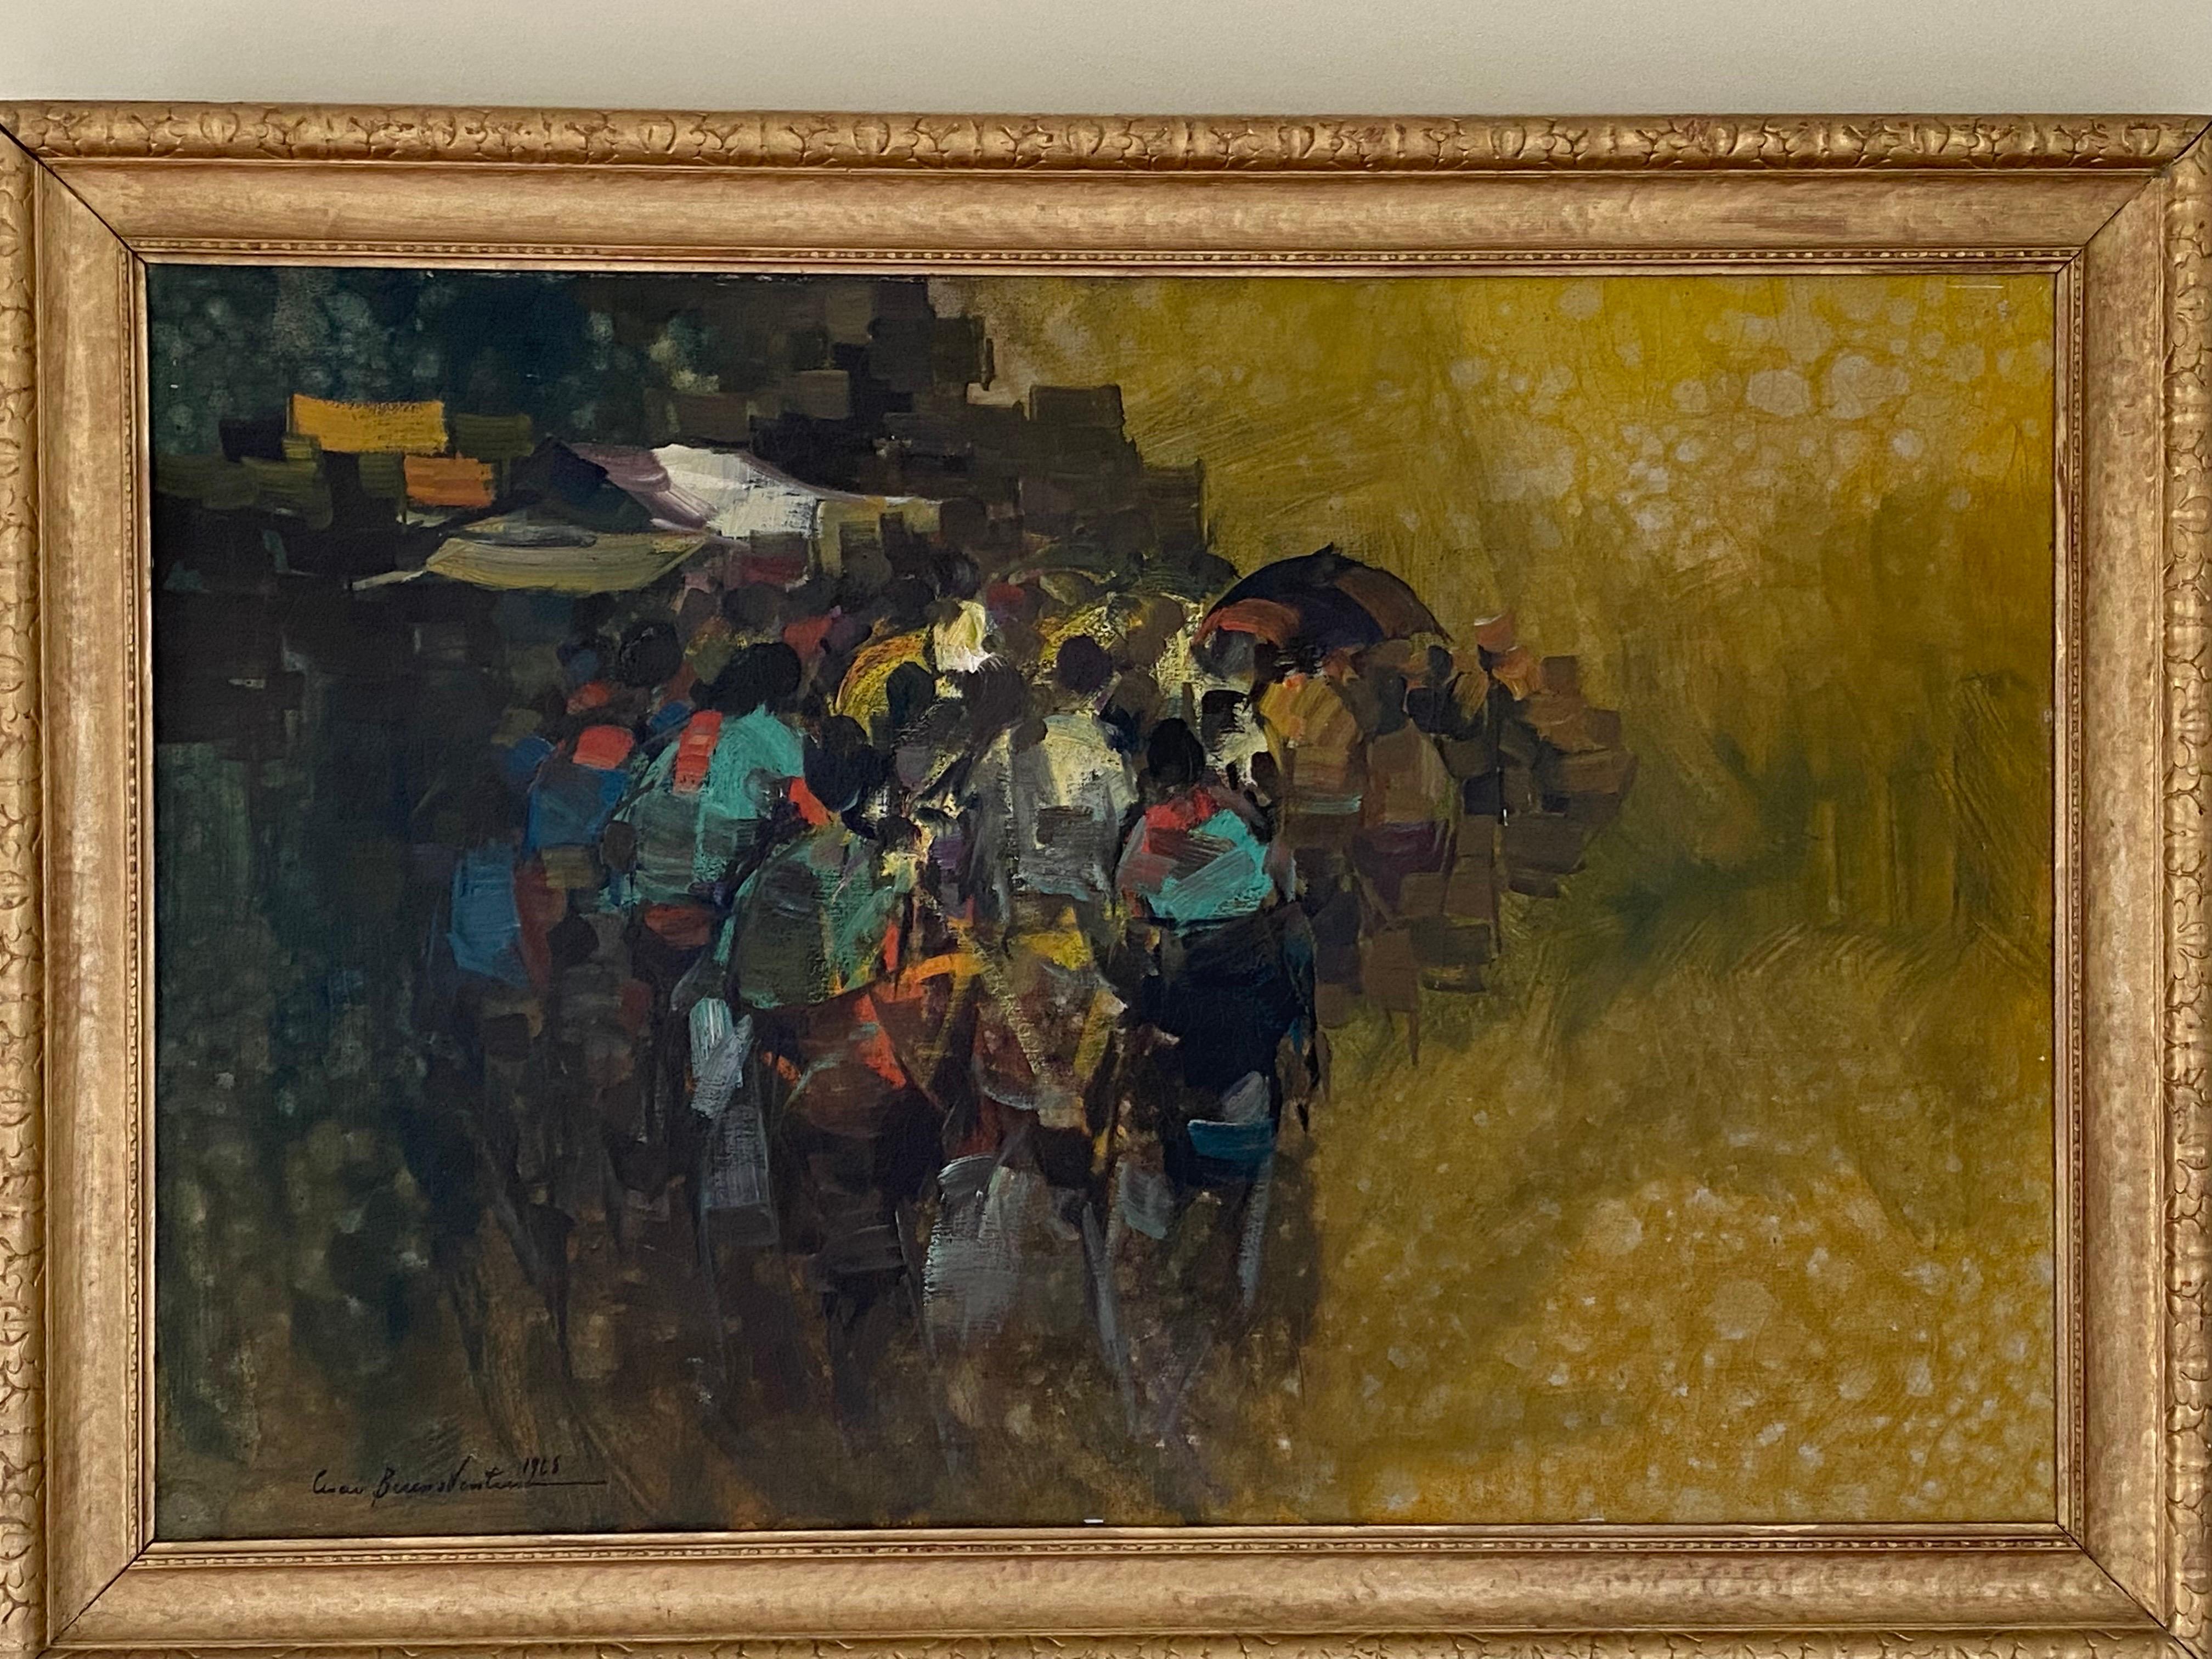 Mid century abstract painting by Cesar Buenaventura (Filipino, 1922–1983) 

Nice colorful compostion of villagers gathering and sitting in an outdoor cafe marketplace with some buildings in the distance. Signed and dated 1968. Nicely framed in a